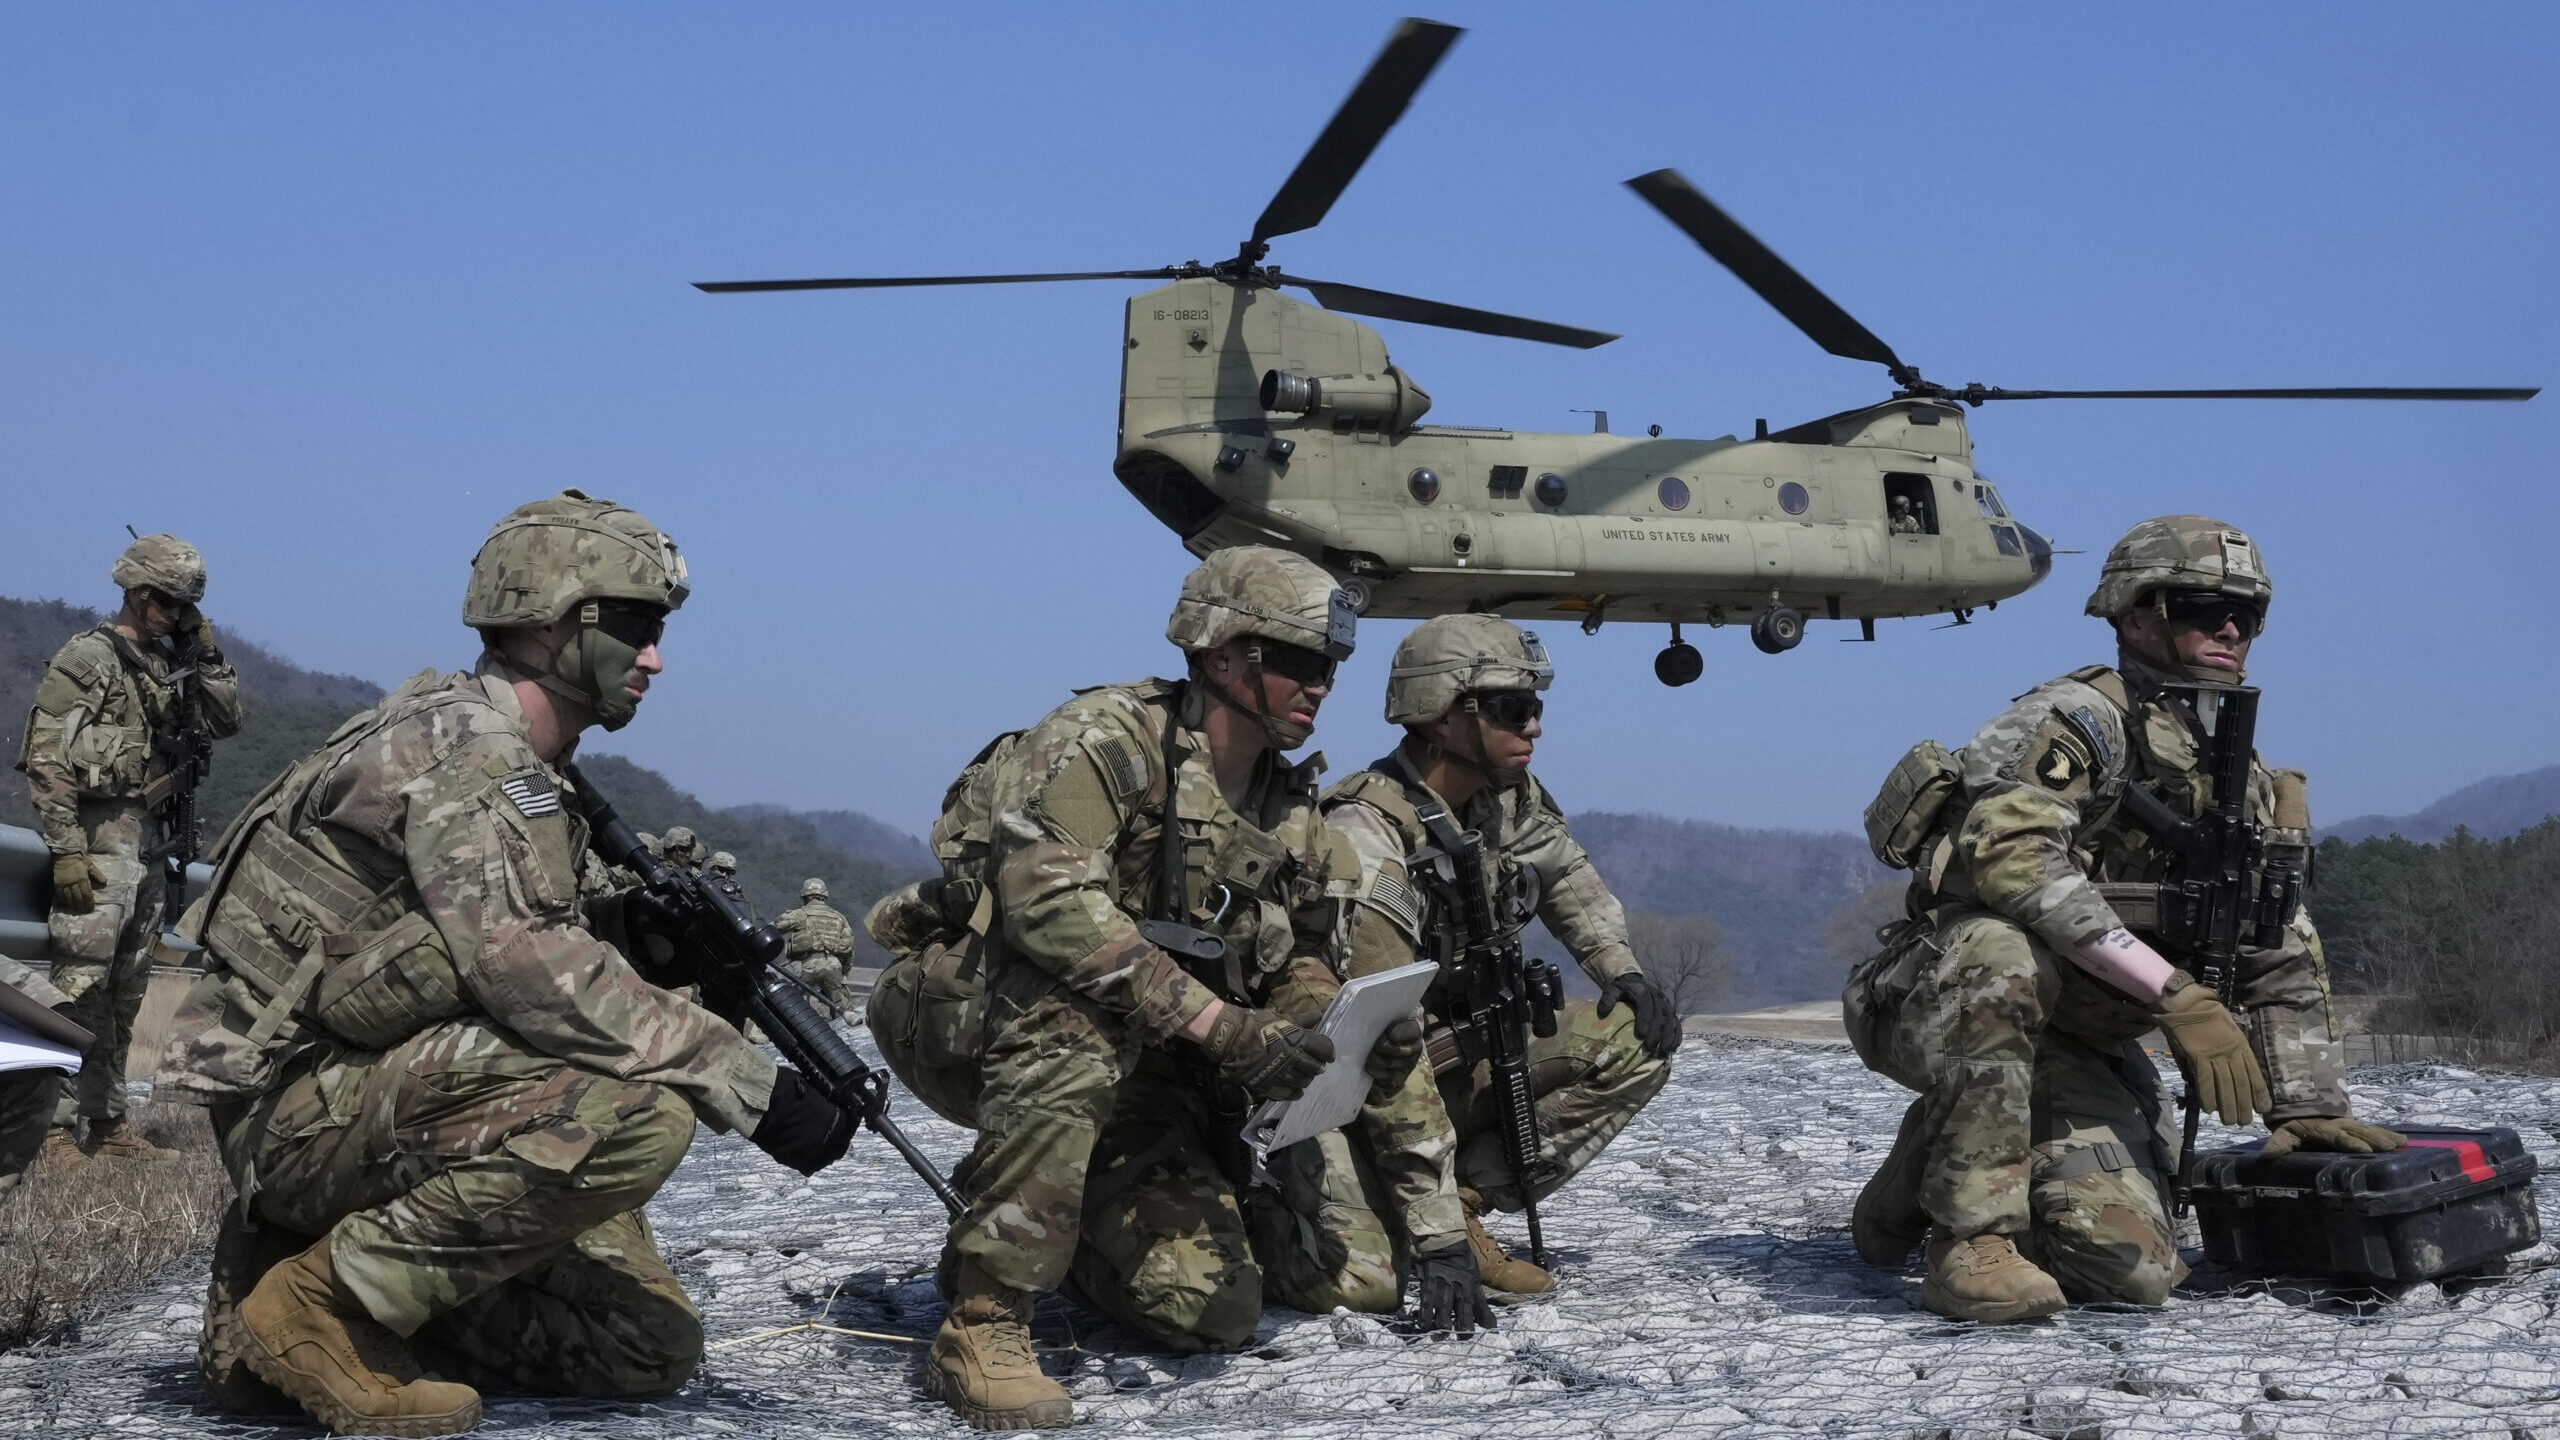 U.S. Army soldiers wait to board their CH-47 Chinook helicopter during a joint military drill betwe...